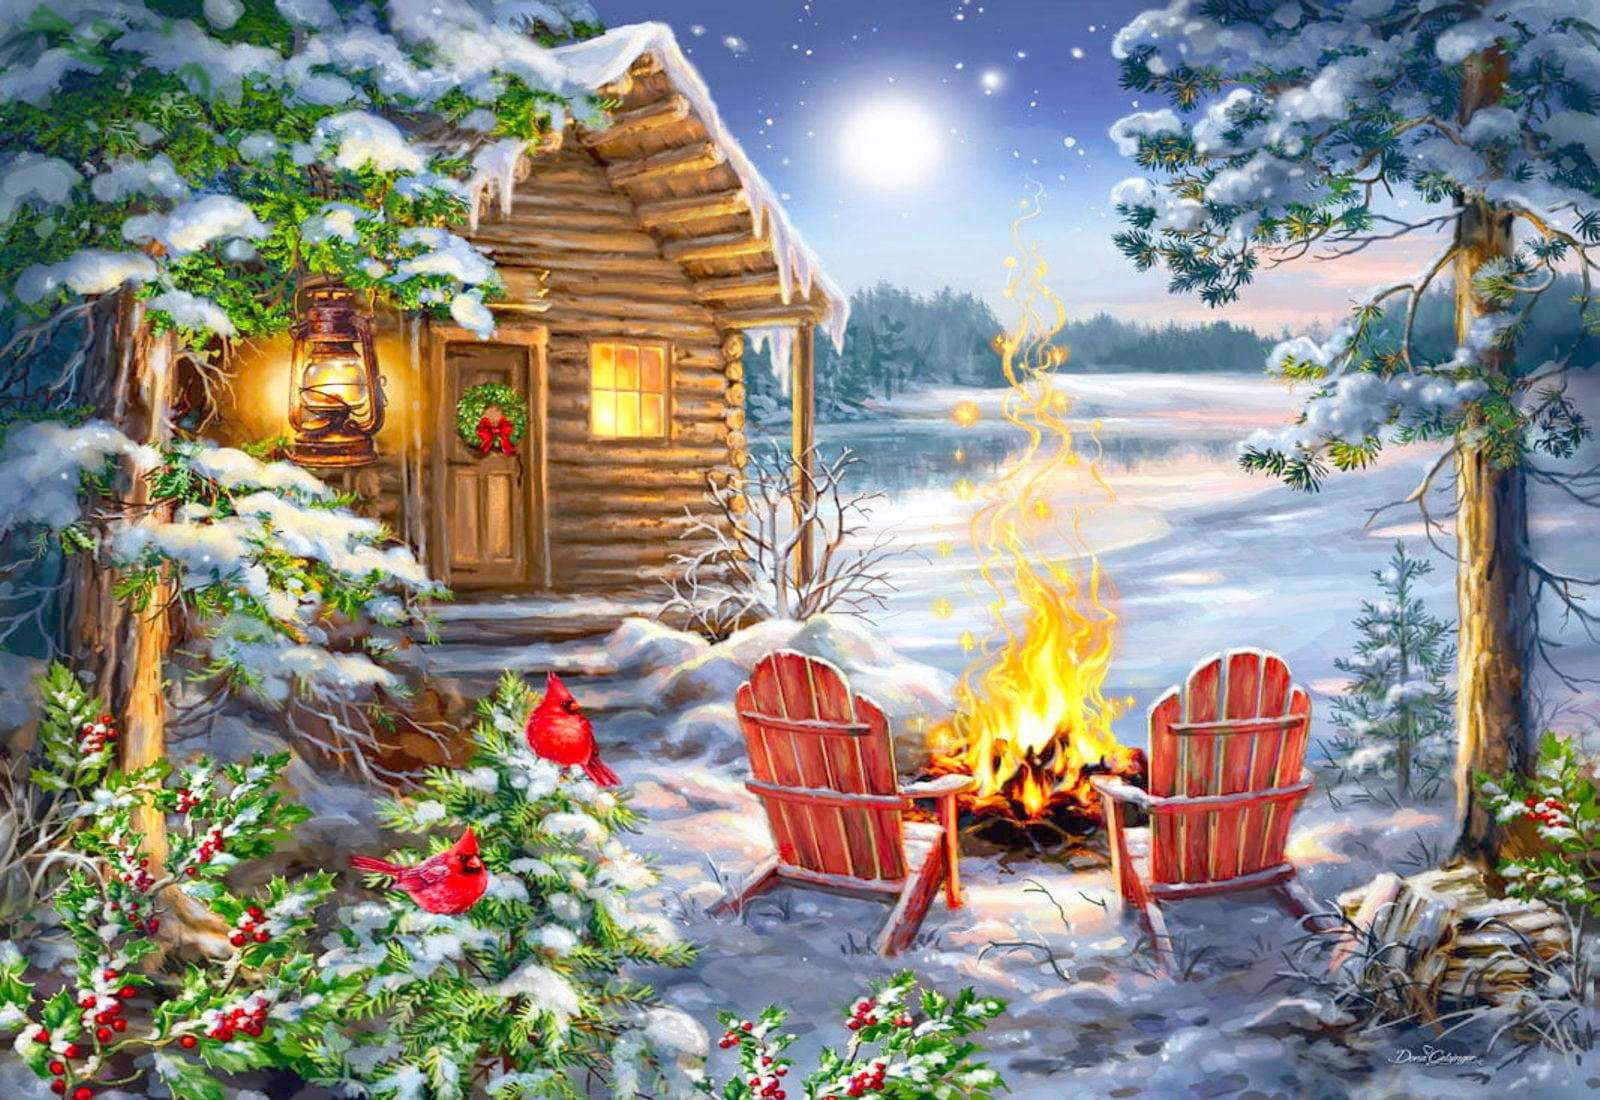 Welcoming Christmas in the forest jigsaw puzzle online